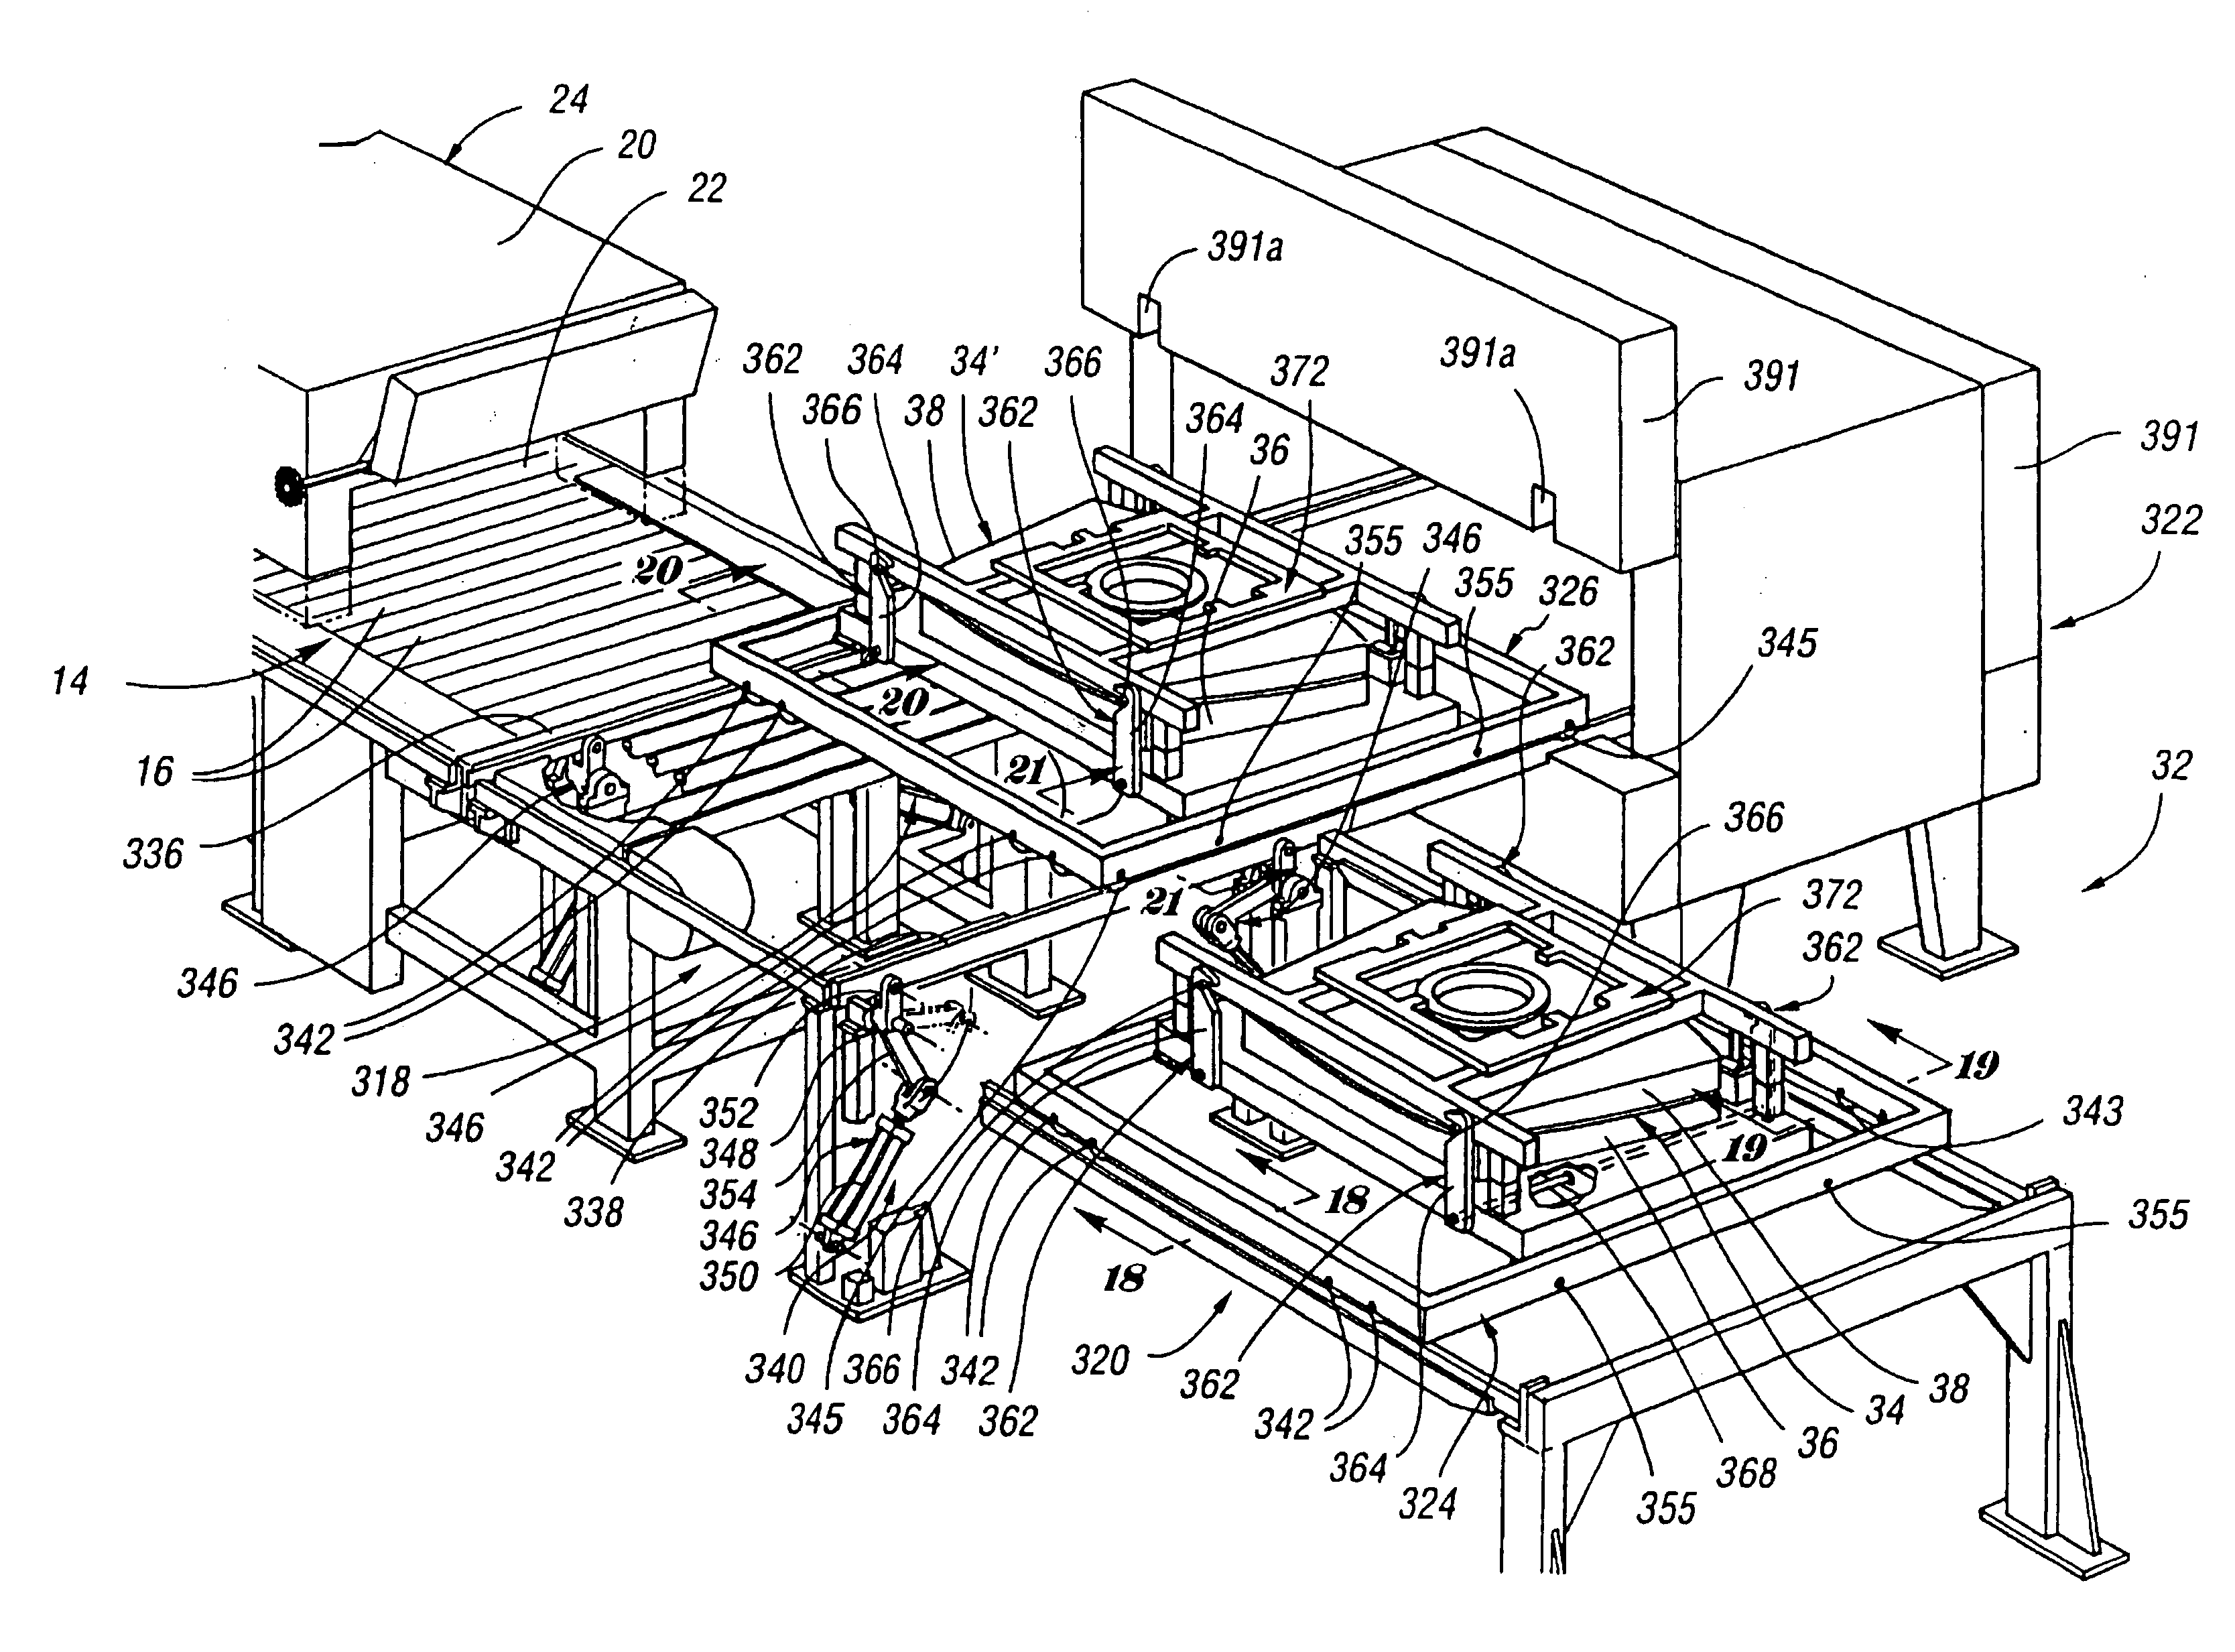 Method for forming heated glass sheets